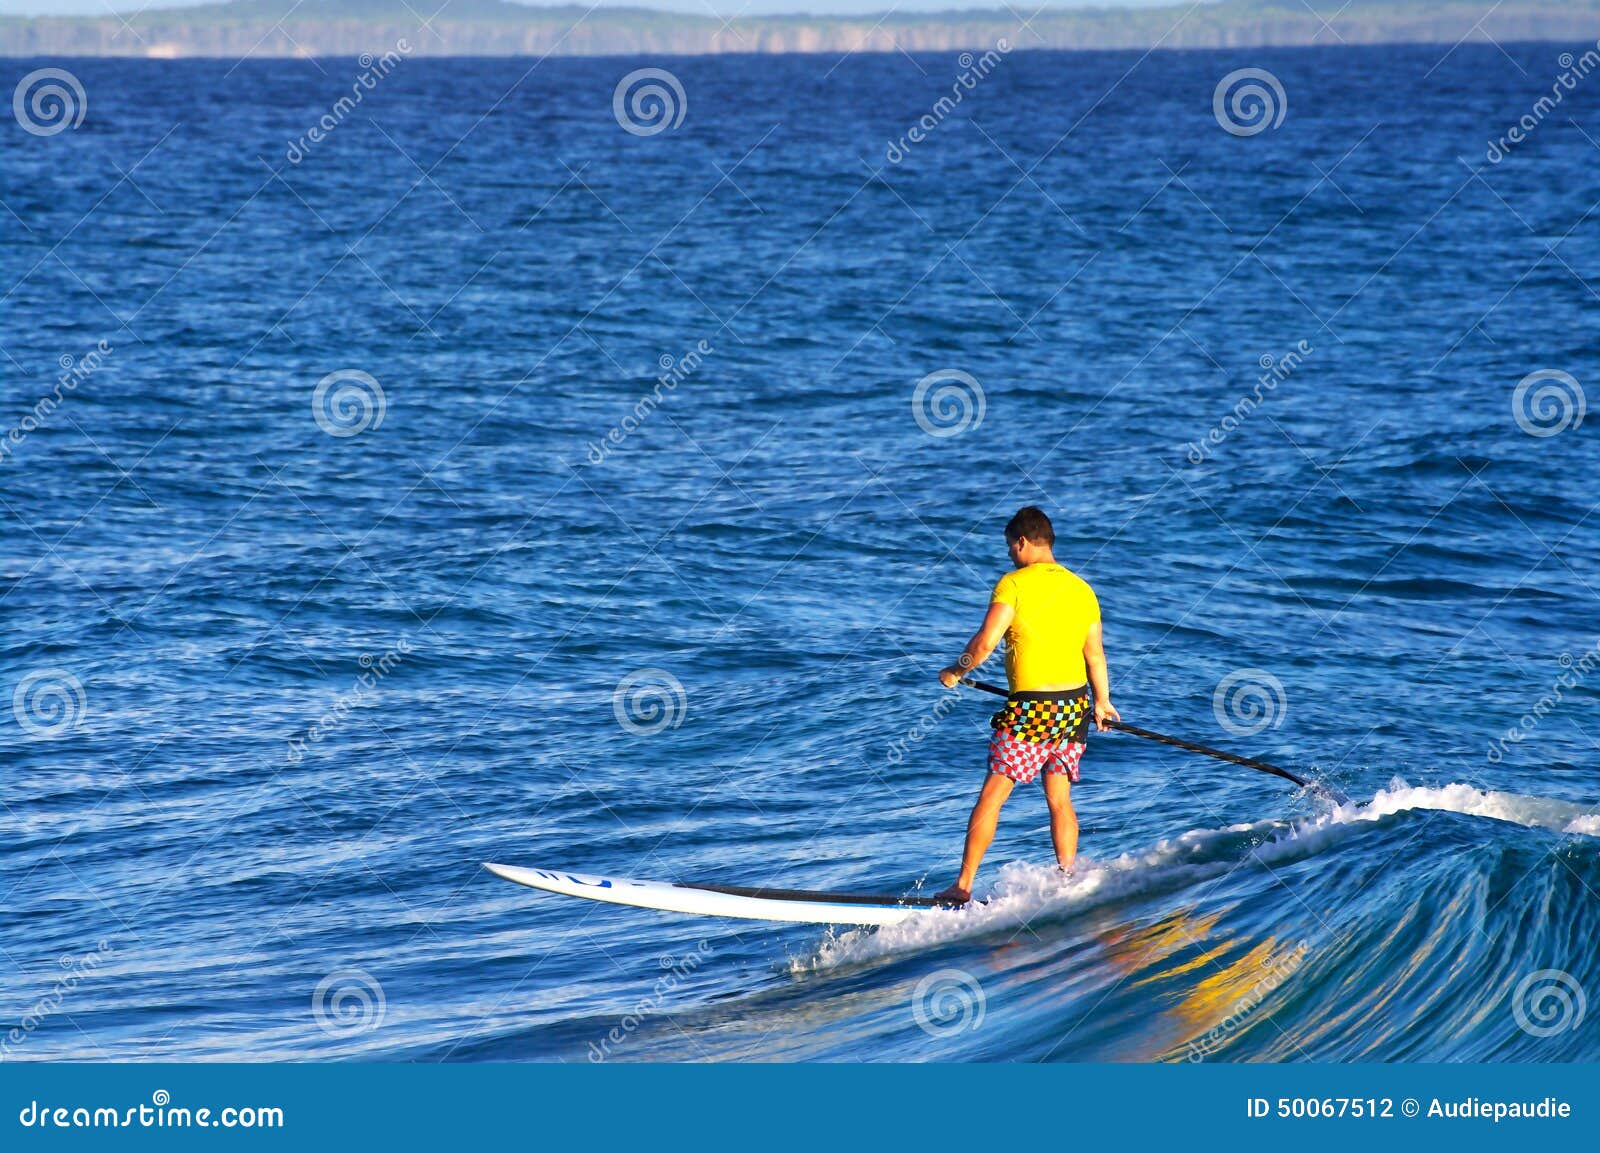 Surfer on a Stand-up Paddle Board Editorial Photography - Image of ...